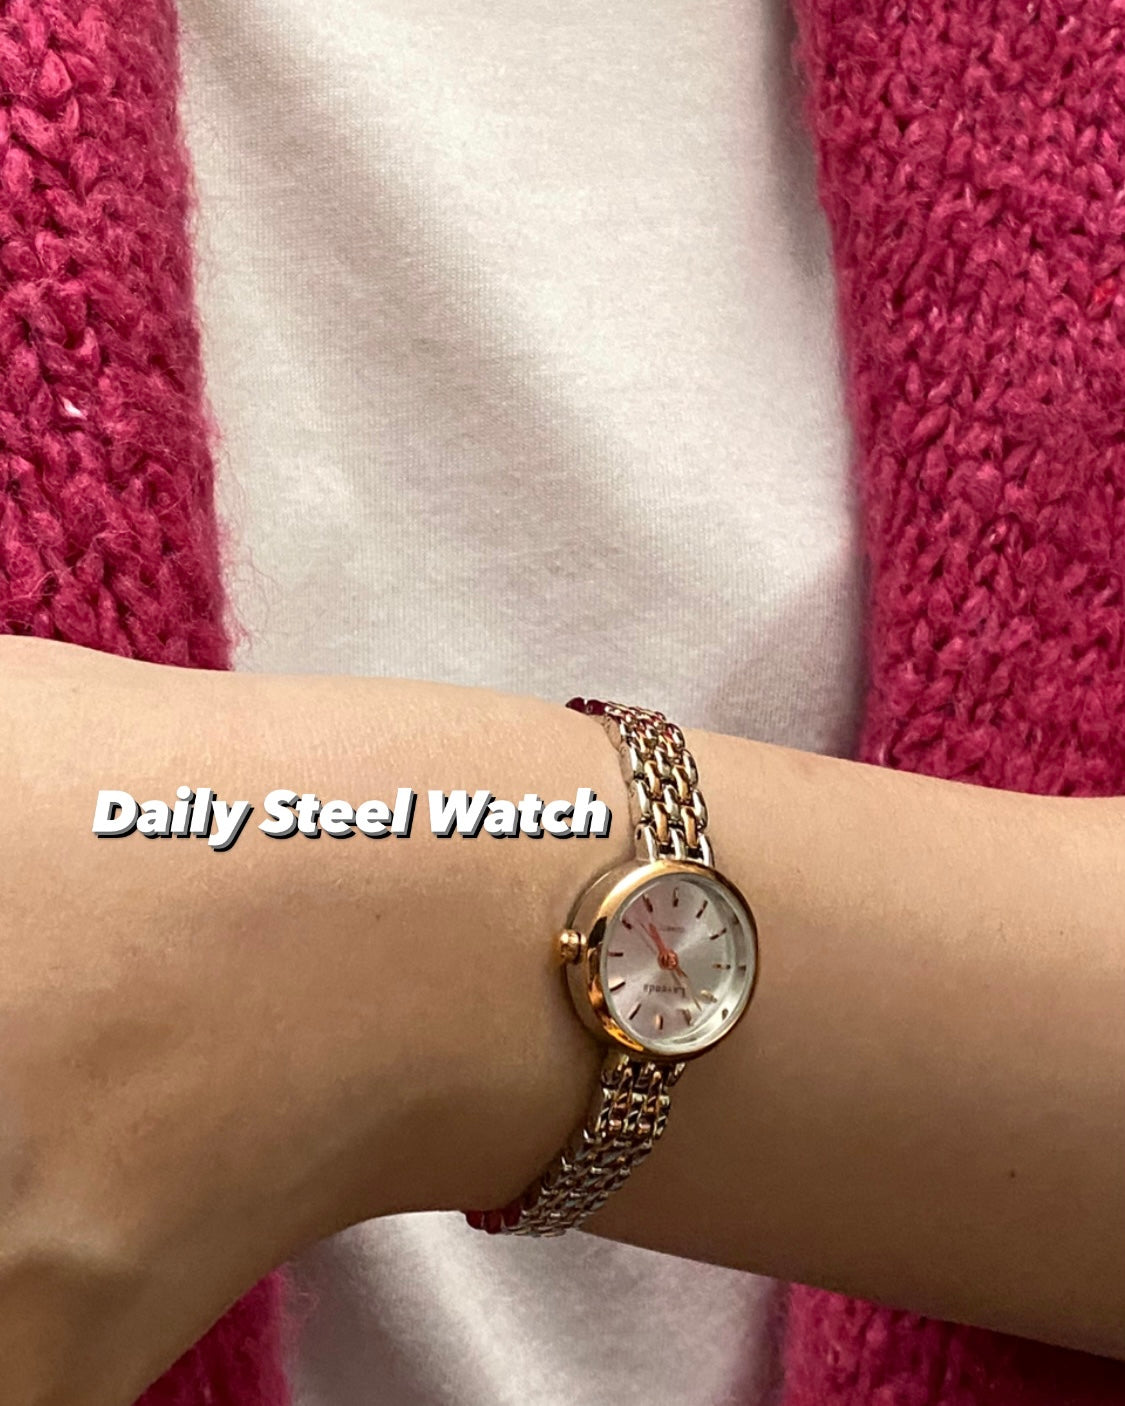 Daily Steel Watch